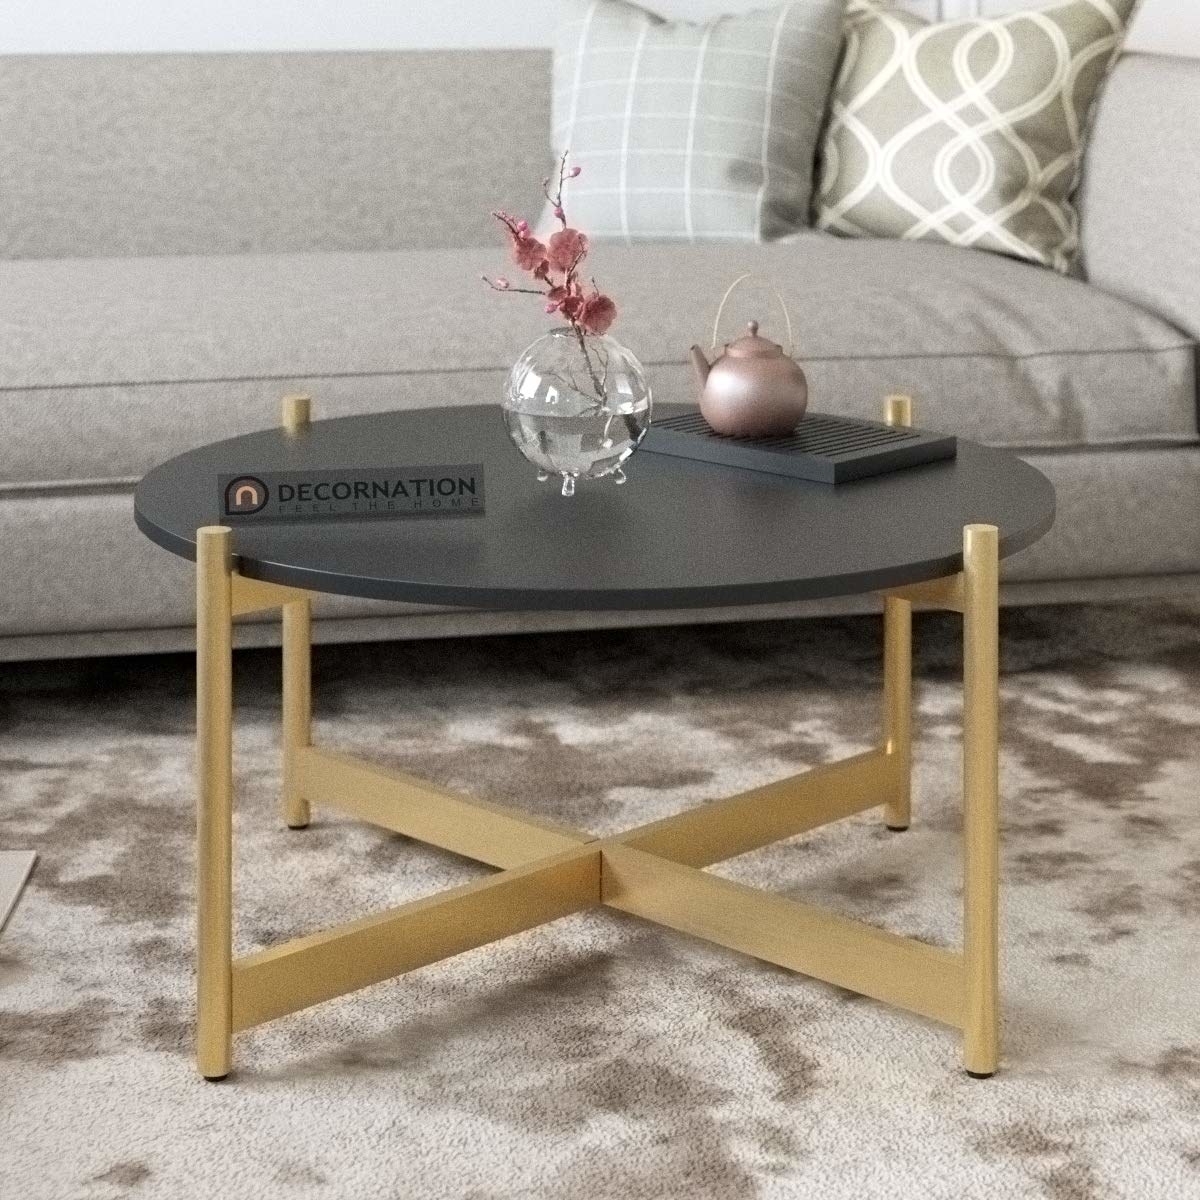 A coffee table with a black top and golden legs